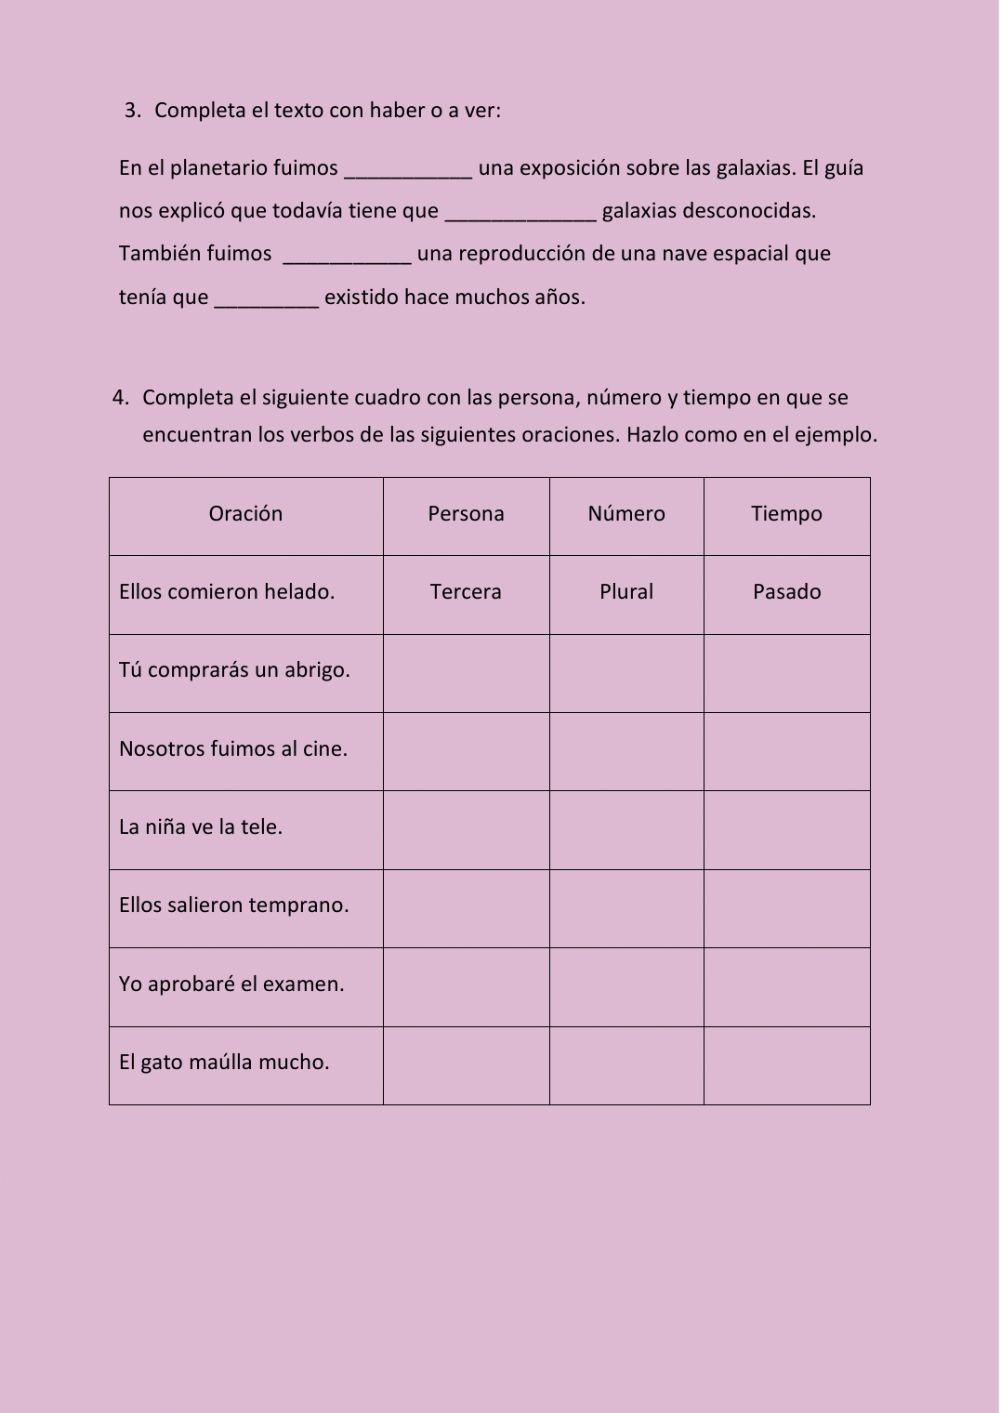 Repaso interactive activity for 4º | Live Worksheets